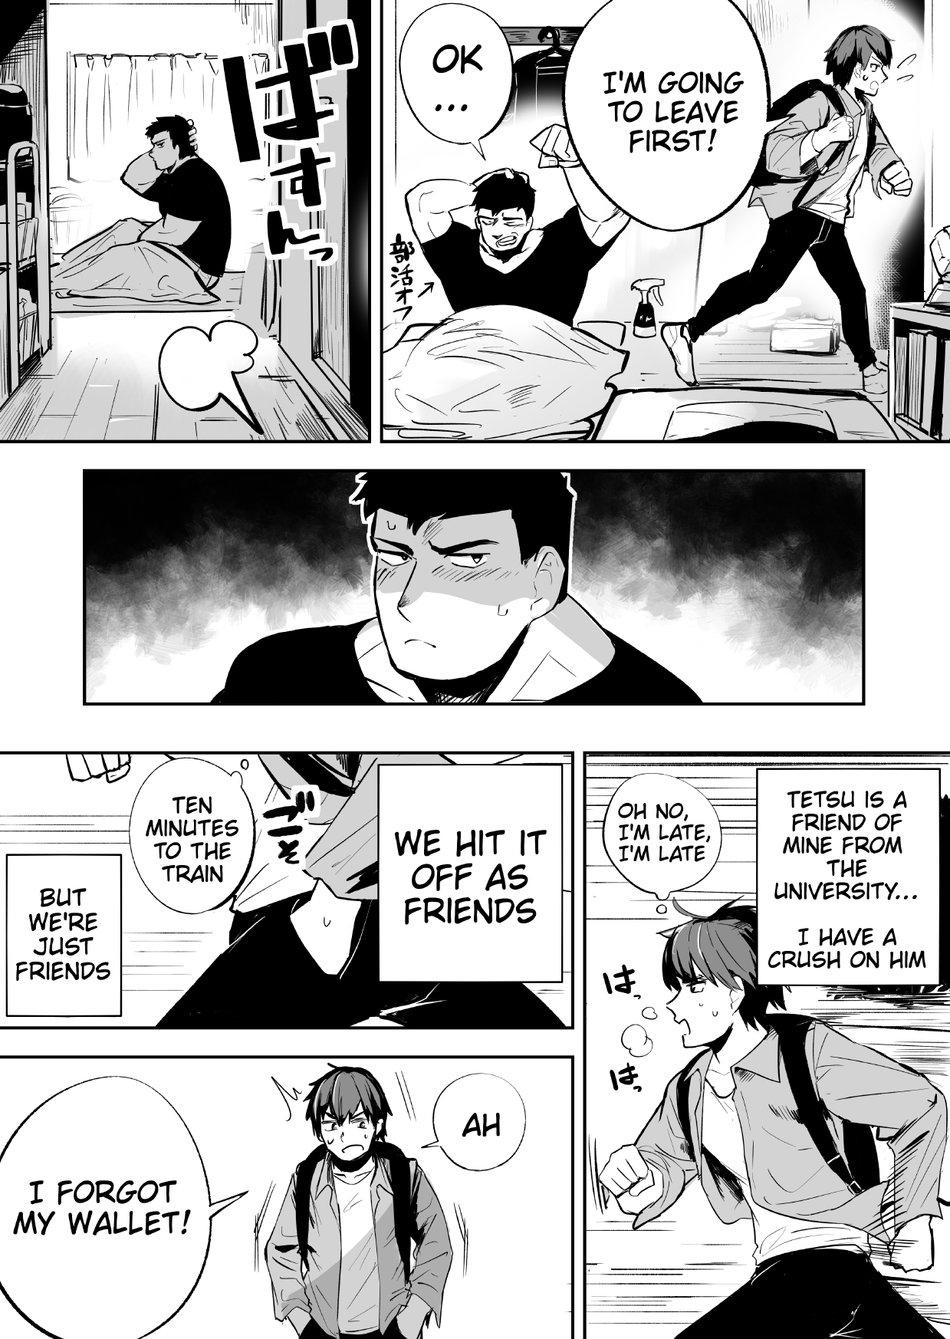 Students A stocky straight guy who actually loves me - Original Wrestling - Page 4